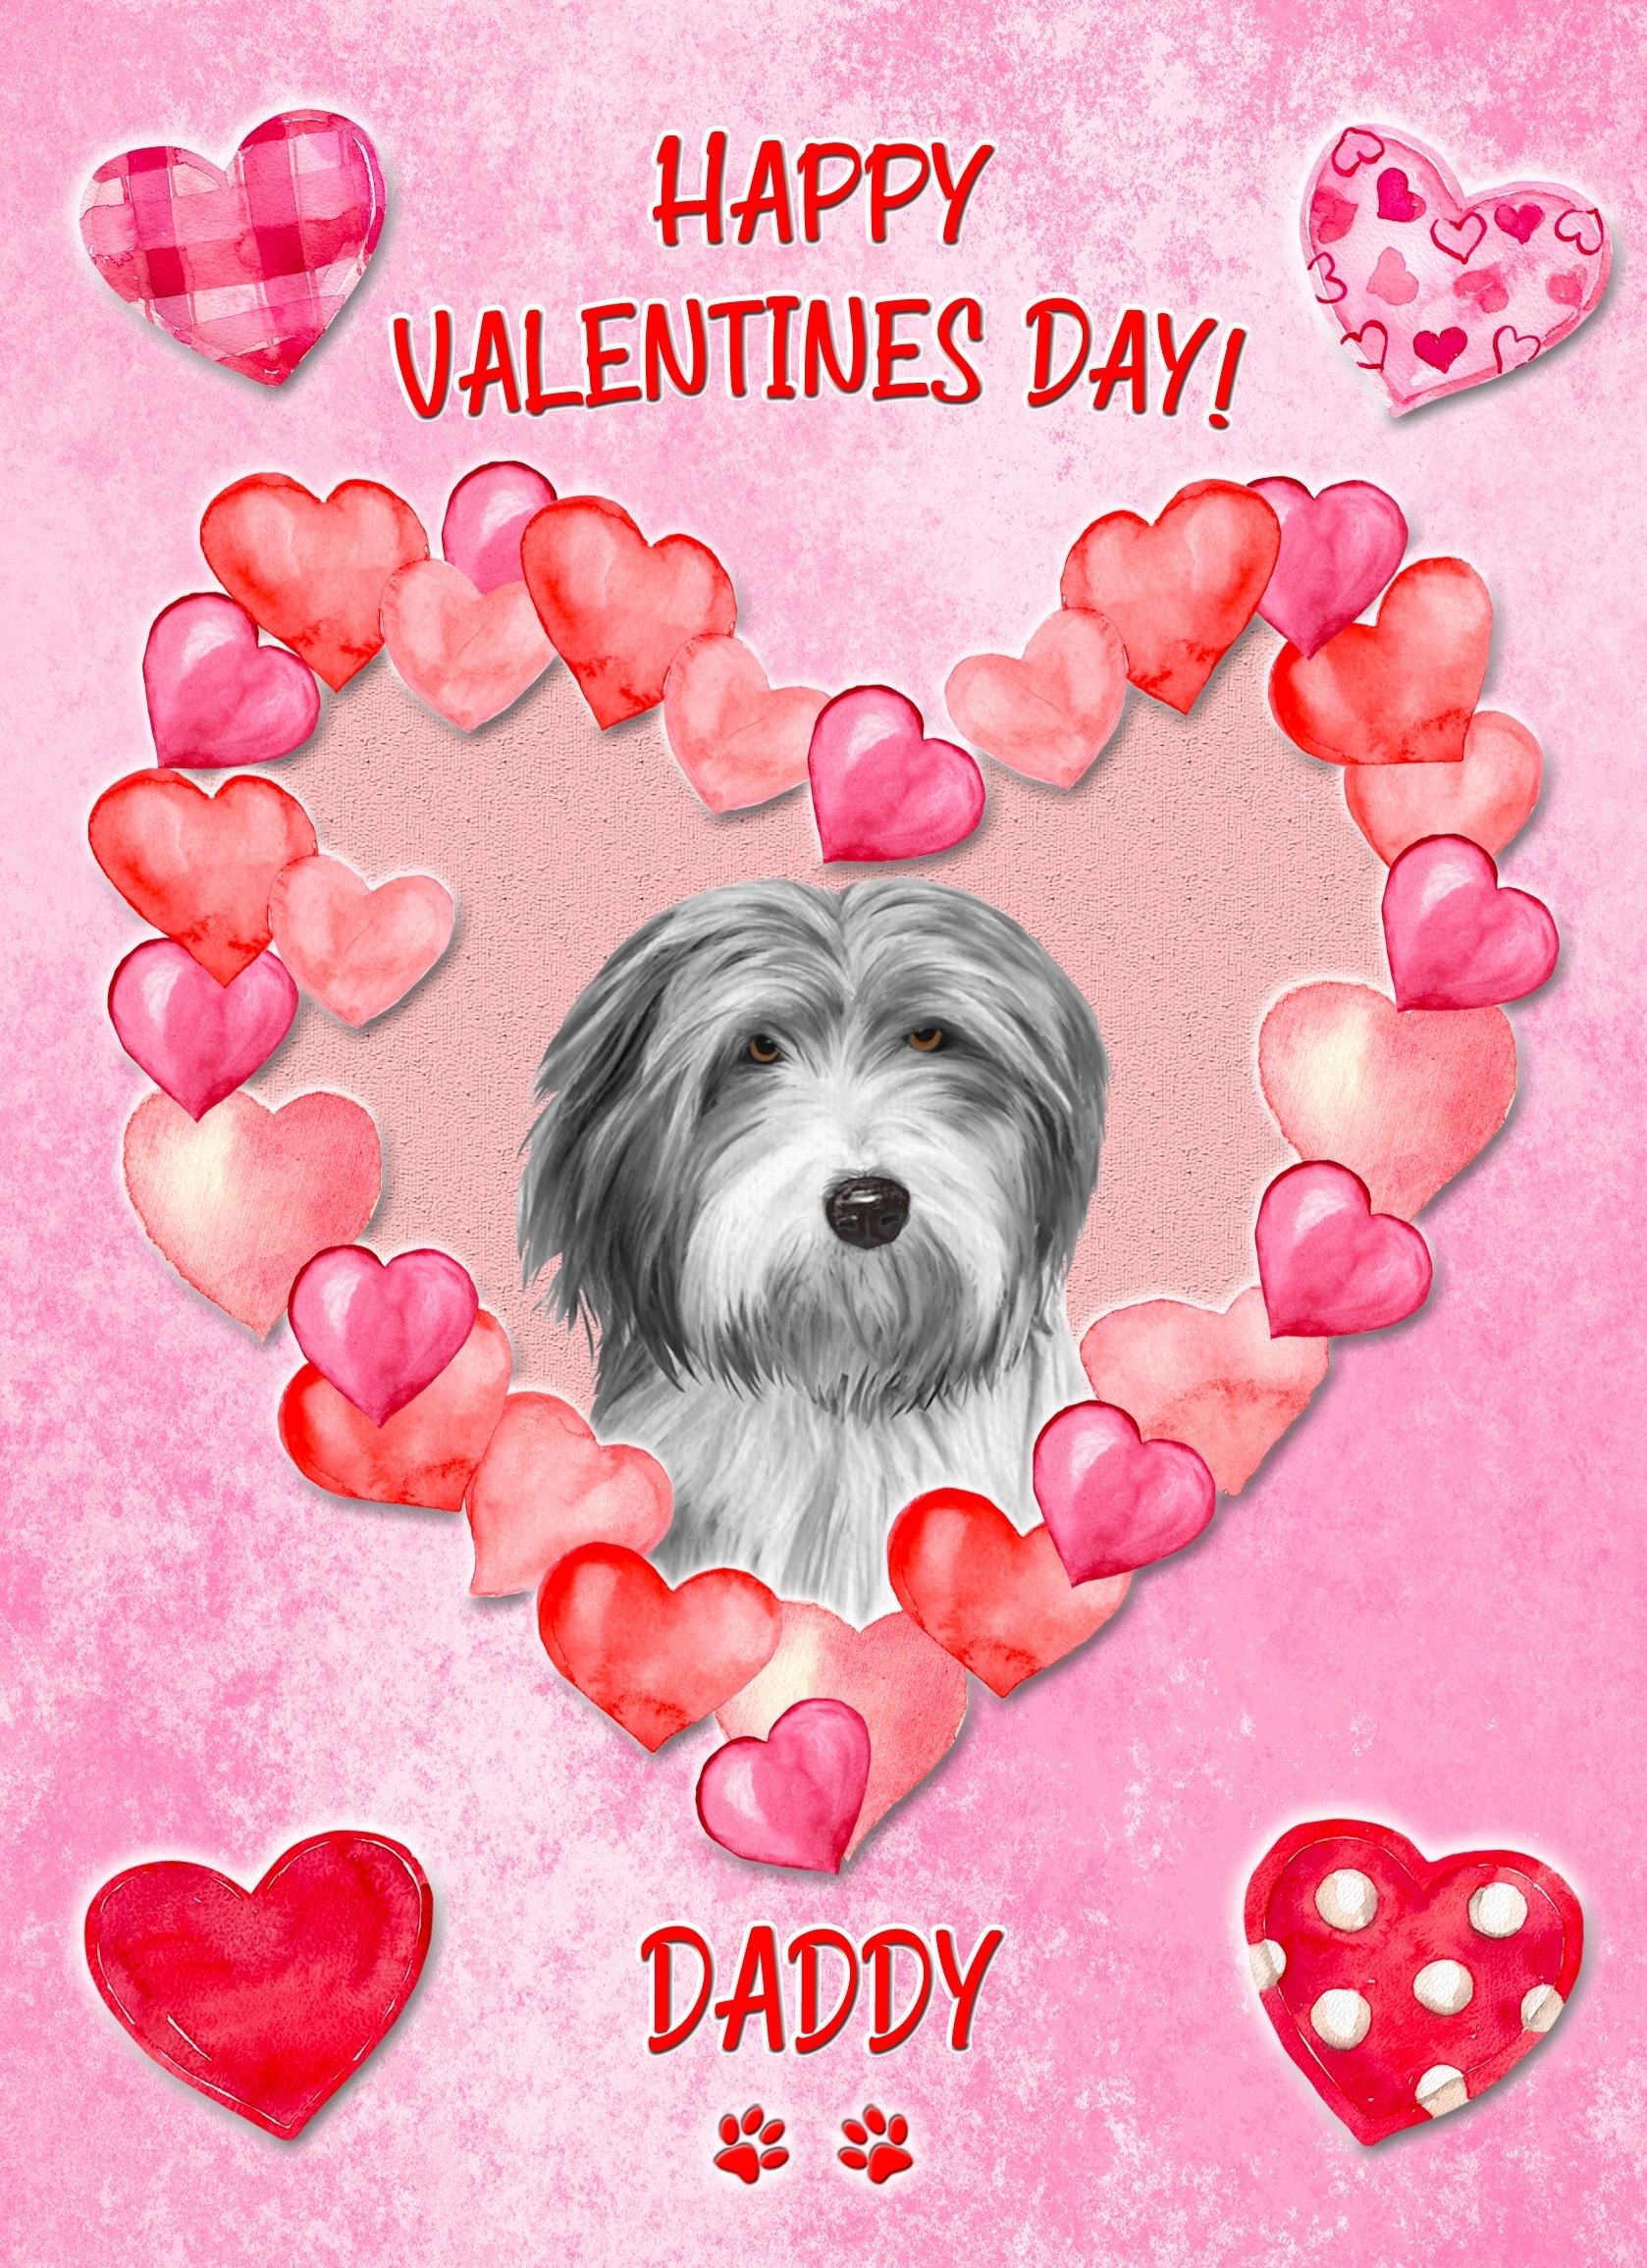 Bearded Collie Dog Valentines Day Card (Happy Valentines, Daddy)